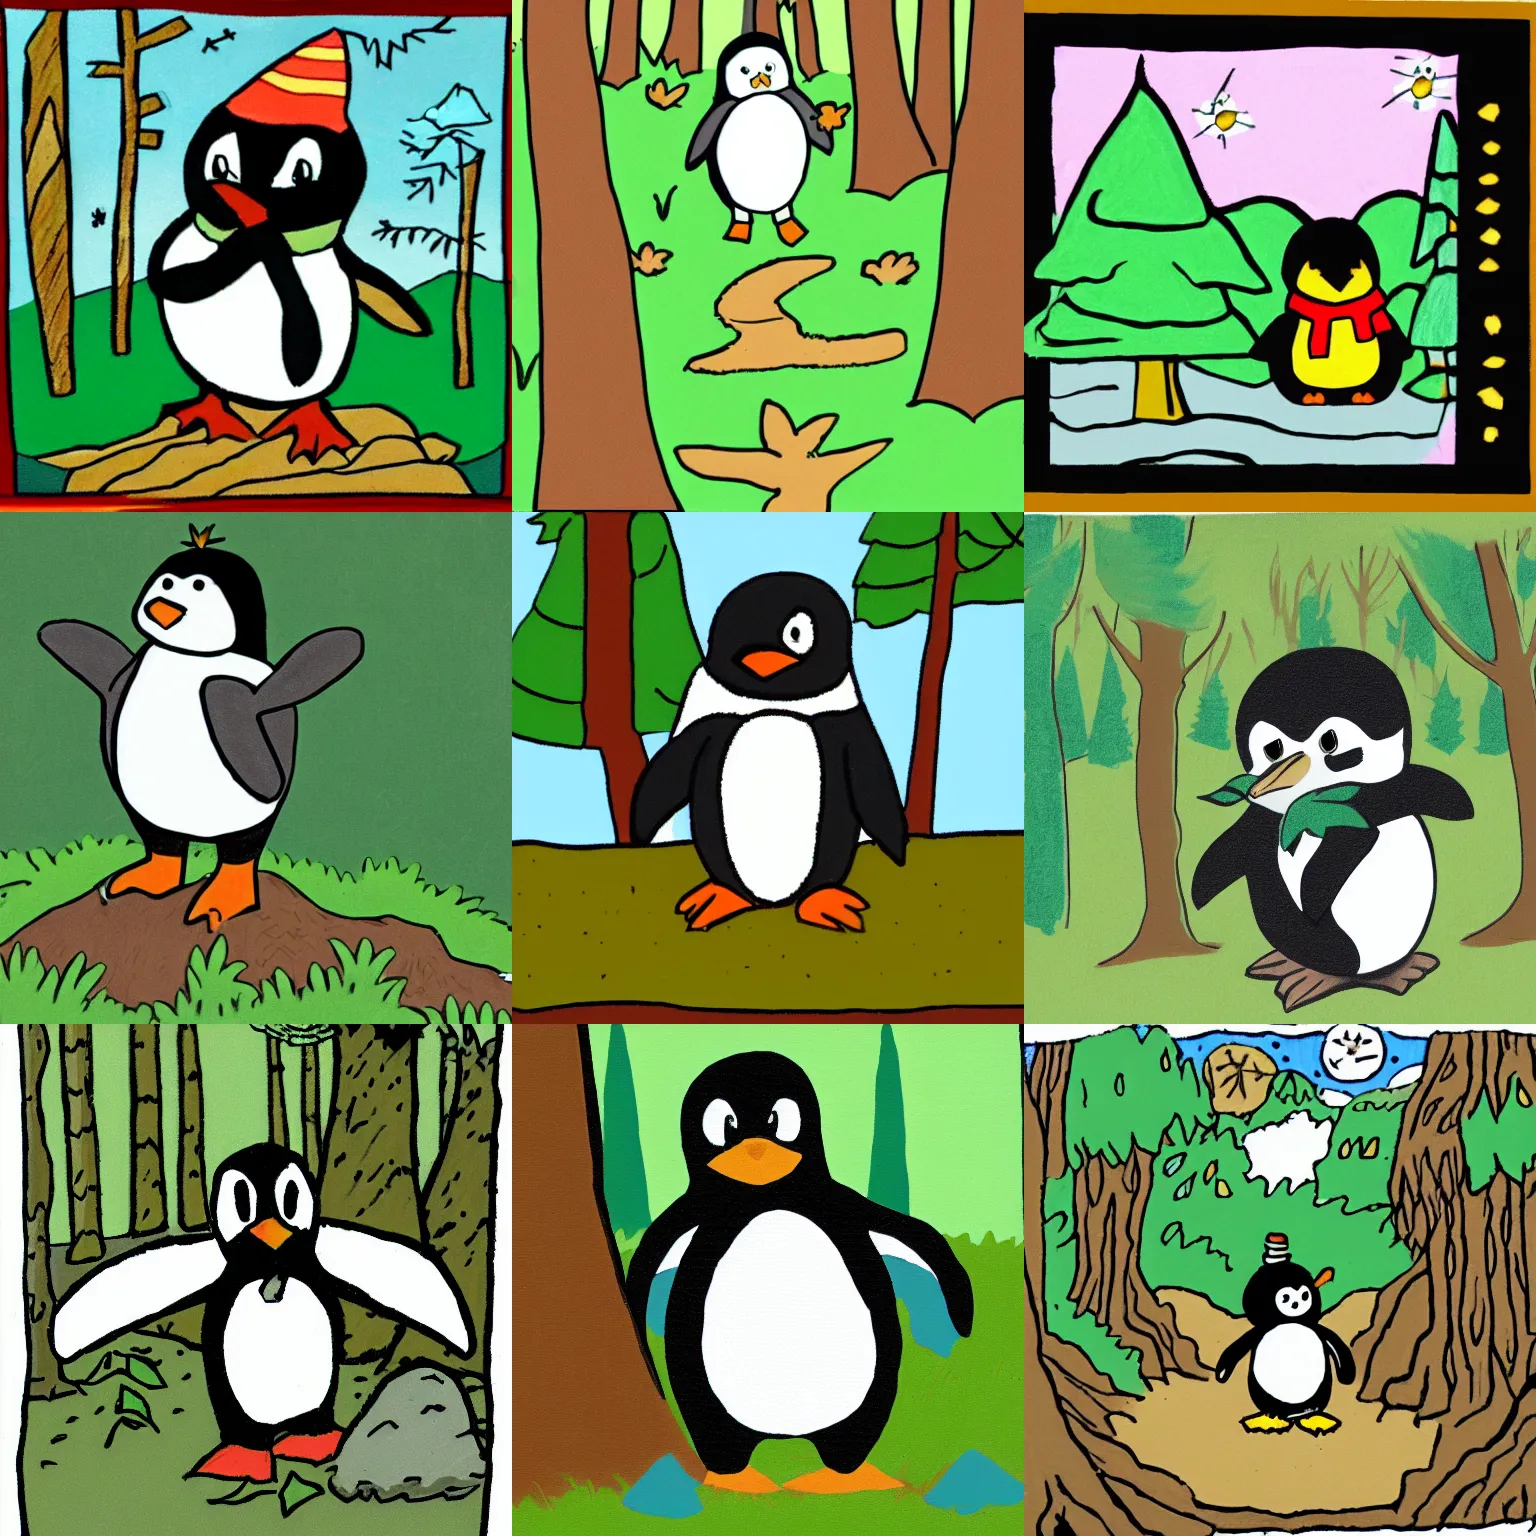 Prompt: mspaint drawing of pokey the penguin sitting in a forest